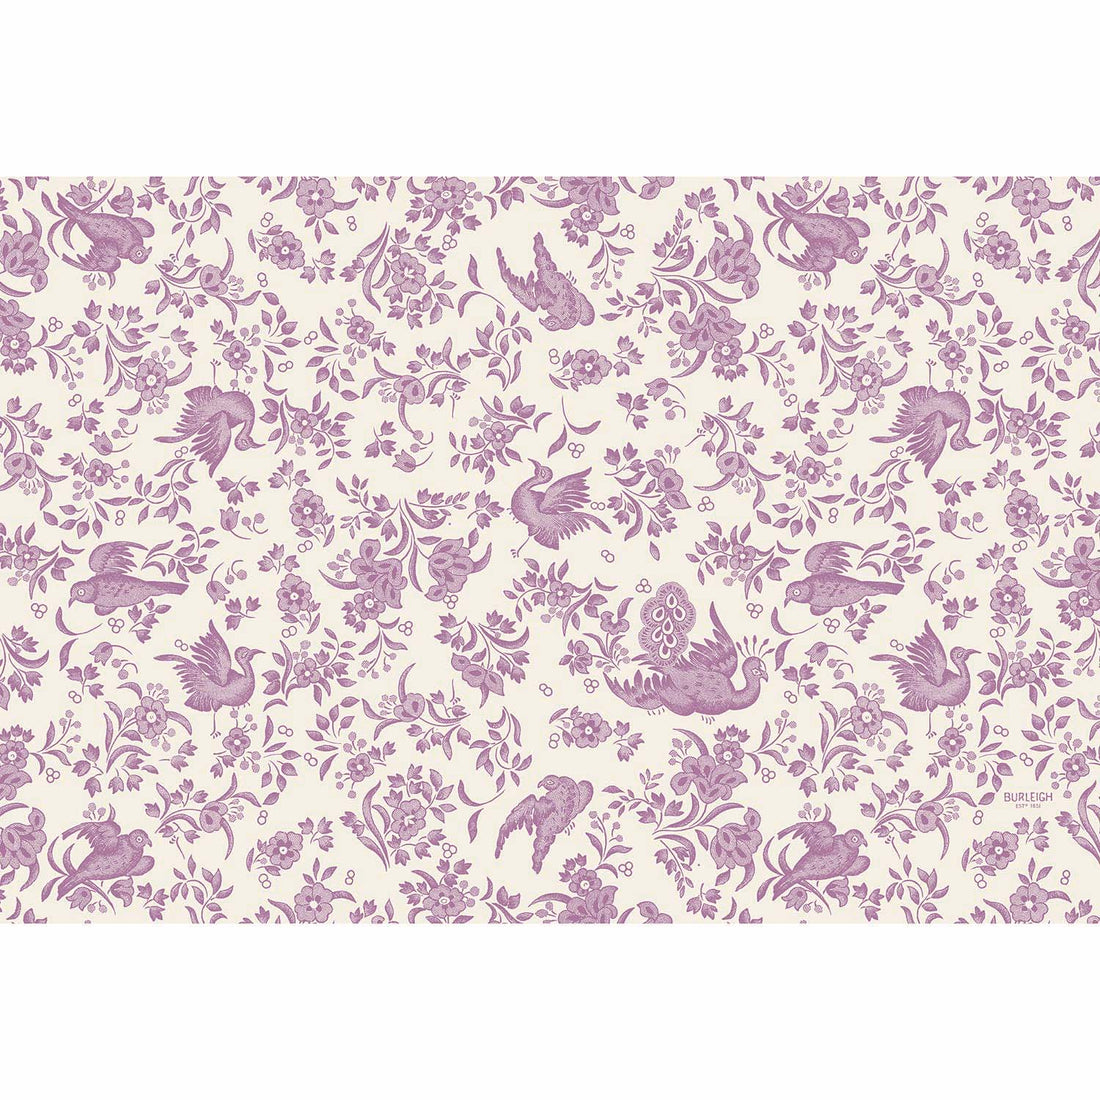 A Lilac Regal Peacock Paper Placemat from Hester &amp; Cook, featuring a lilac bird and floral pattern on a white background, inspired by the ornamental bird pattern from Burleigh.